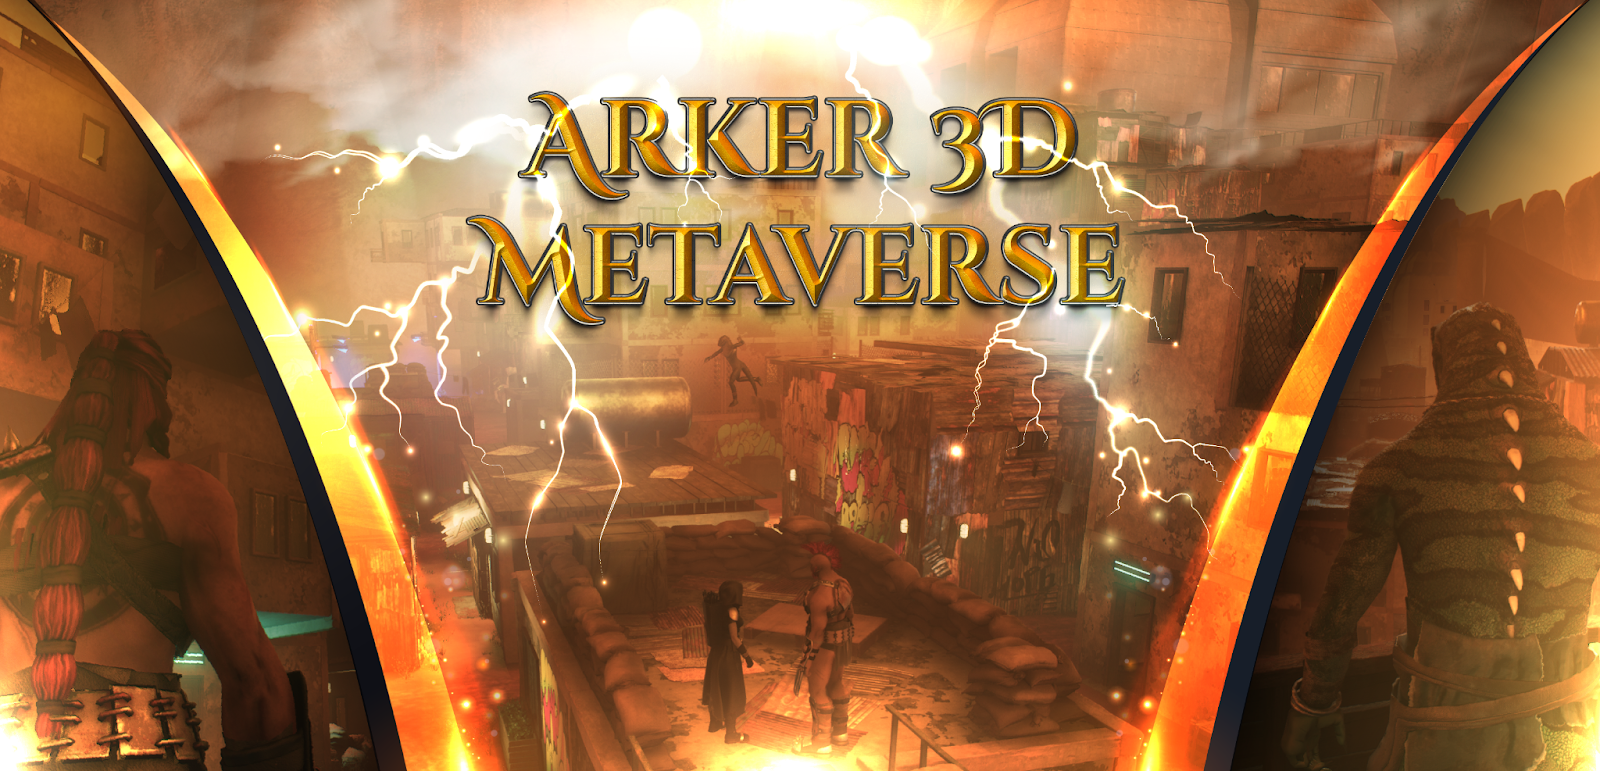 Arker The Legend of Ohm Metaverse Is Leaping Into 3D